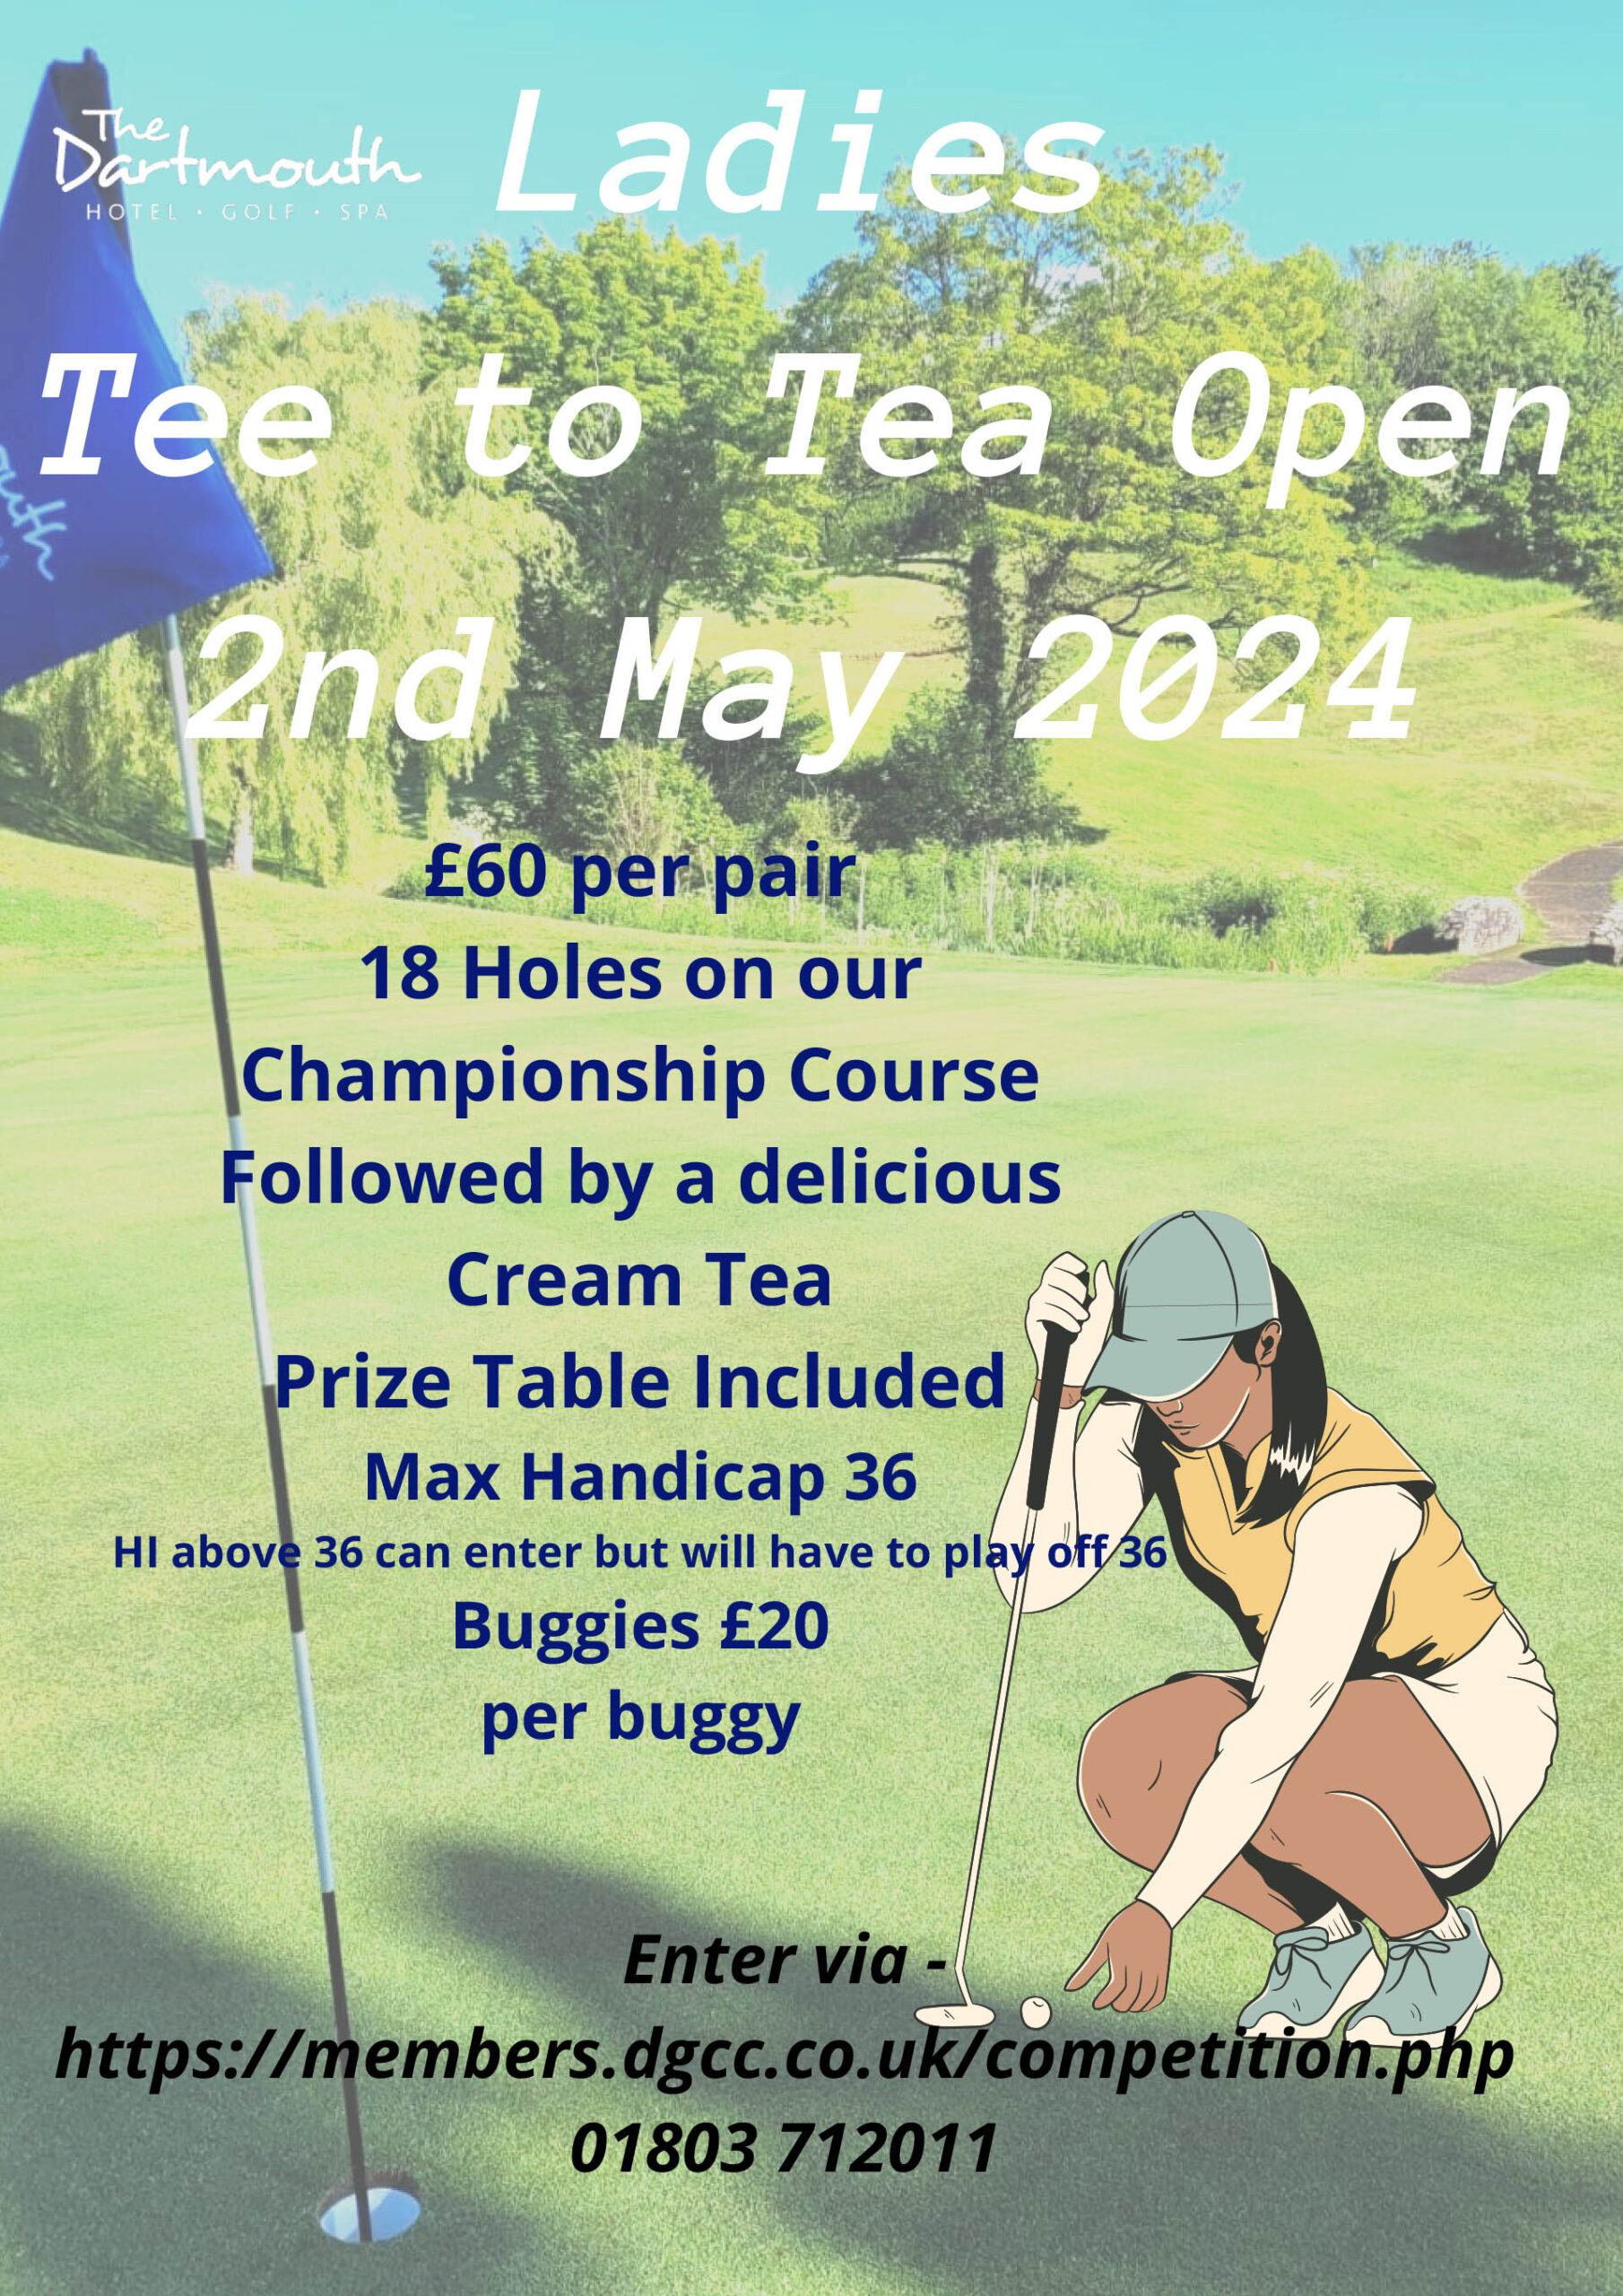 tee to tea at the Dartmouth Hotel Golf & Spa